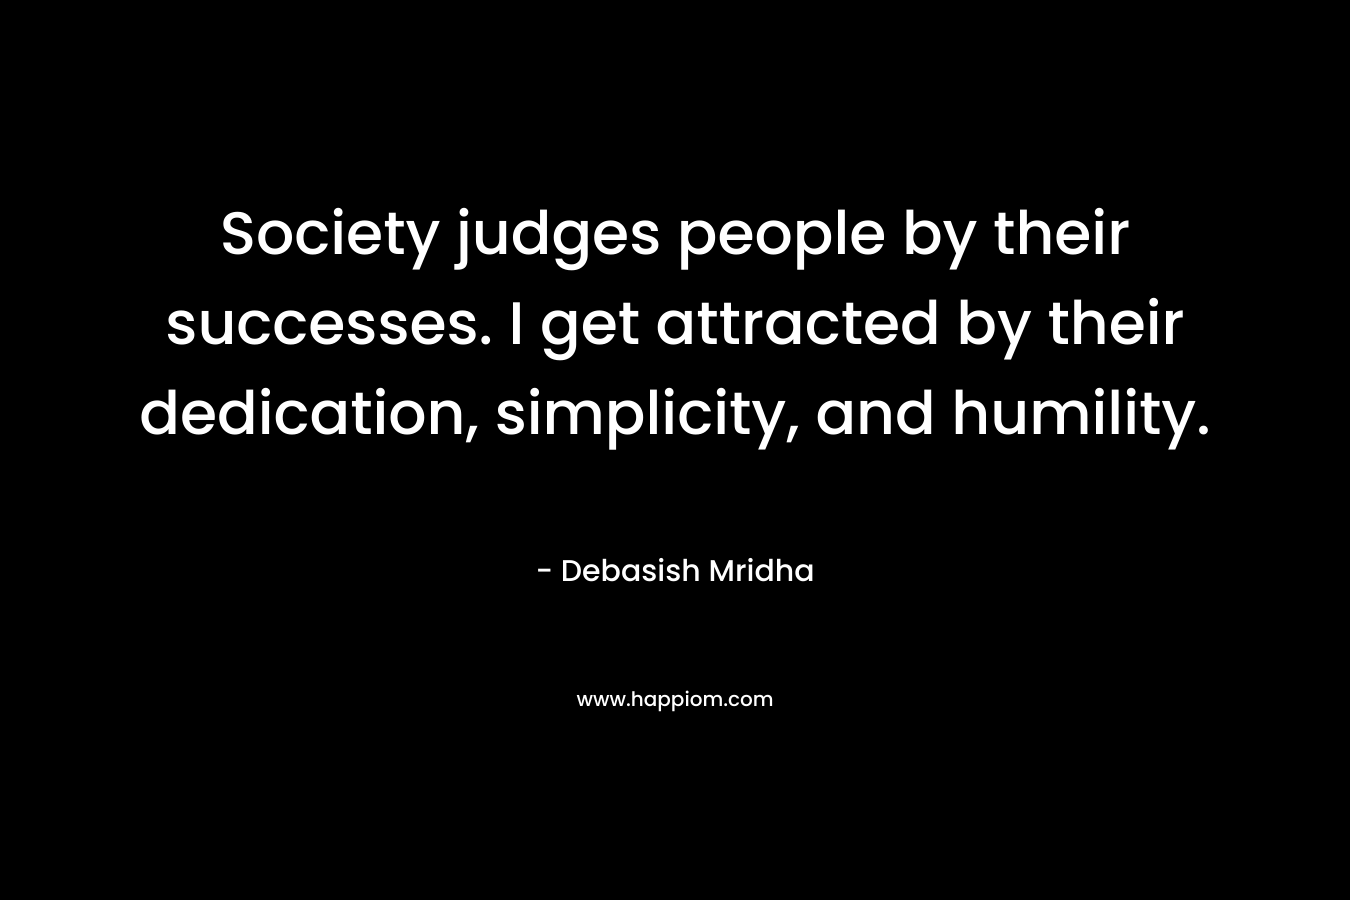 Society judges people by their successes. I get attracted by their dedication, simplicity, and humility.